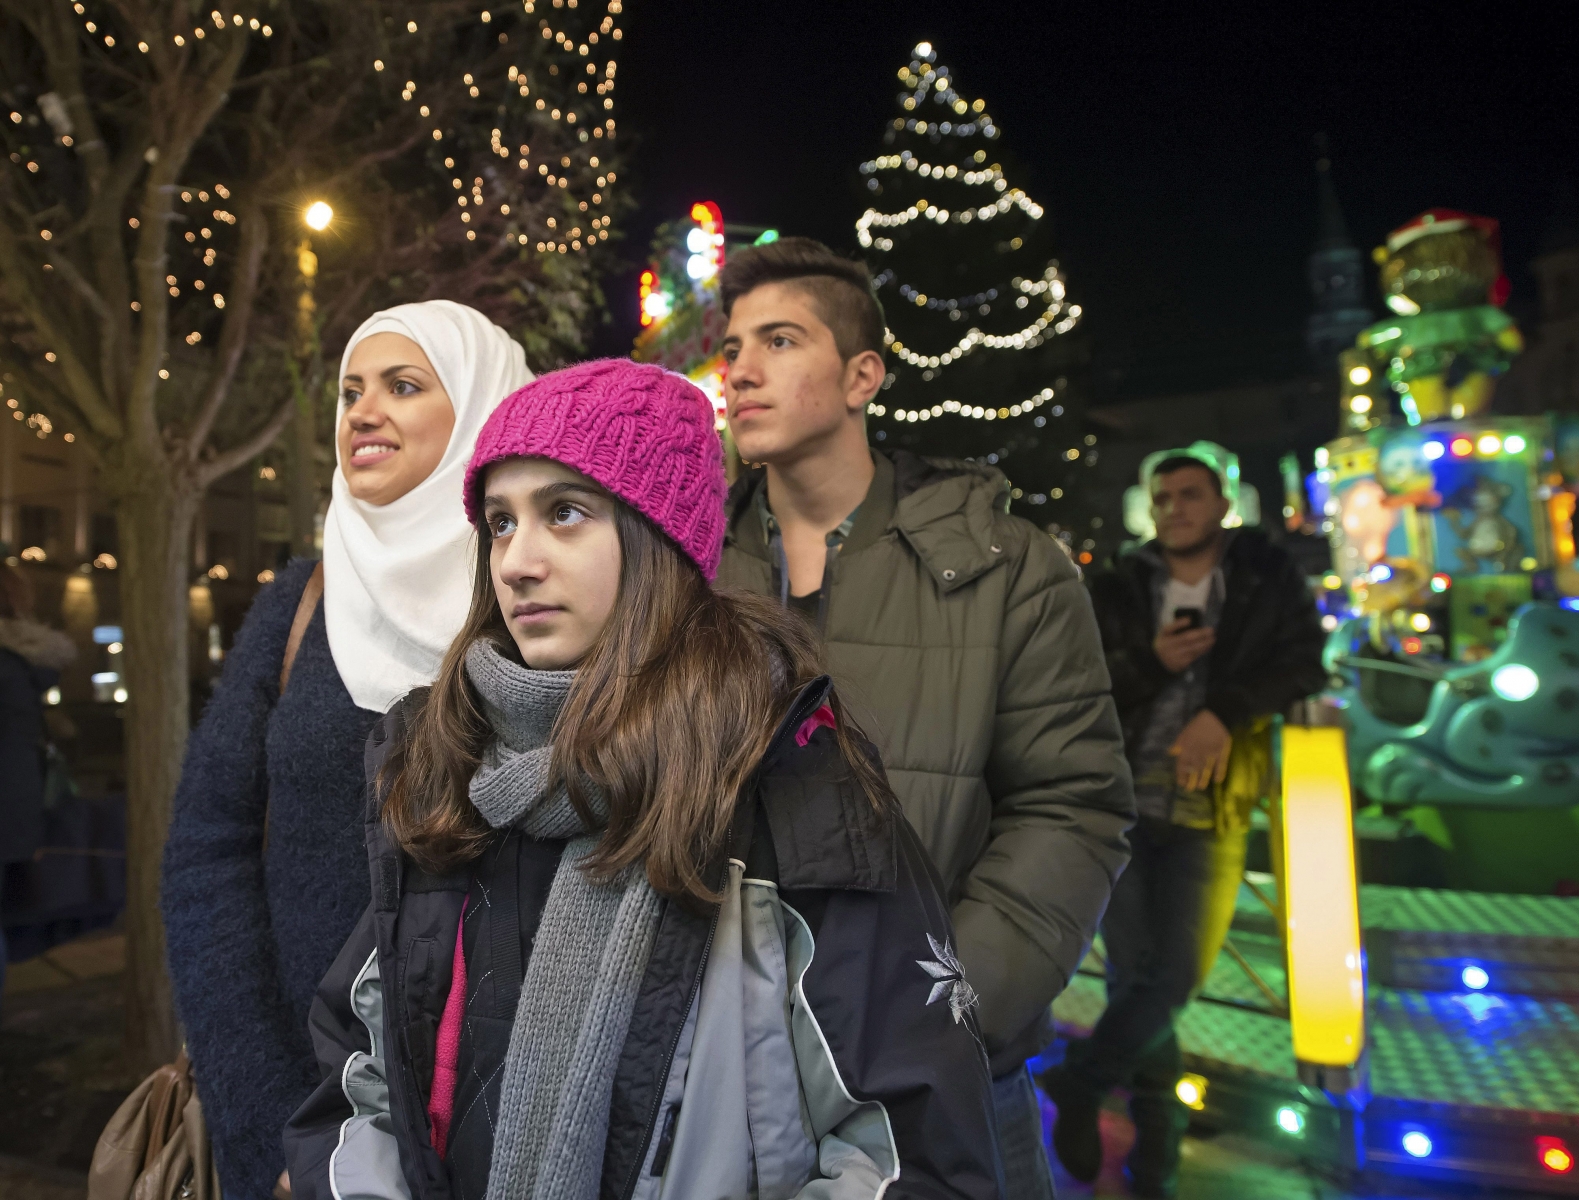 In this photo taken Tuesday, Dec. 8, 2015, Syrian refugees Reem Habashieh, Raghad Habashieh, Yaman Habashieh and Mohammed Habashieh, from left to right, visit the Christmas market in Zwickau, eastern Germany. The Muslim family with their mother Khawla Kareem has joined in the Christmas spirit of their neighbors, decorating the door of their flat with glittery red bells and tree branches in green and gold. (AP Photo/Jens Meyer) Germany The New Europeans Refugee Family